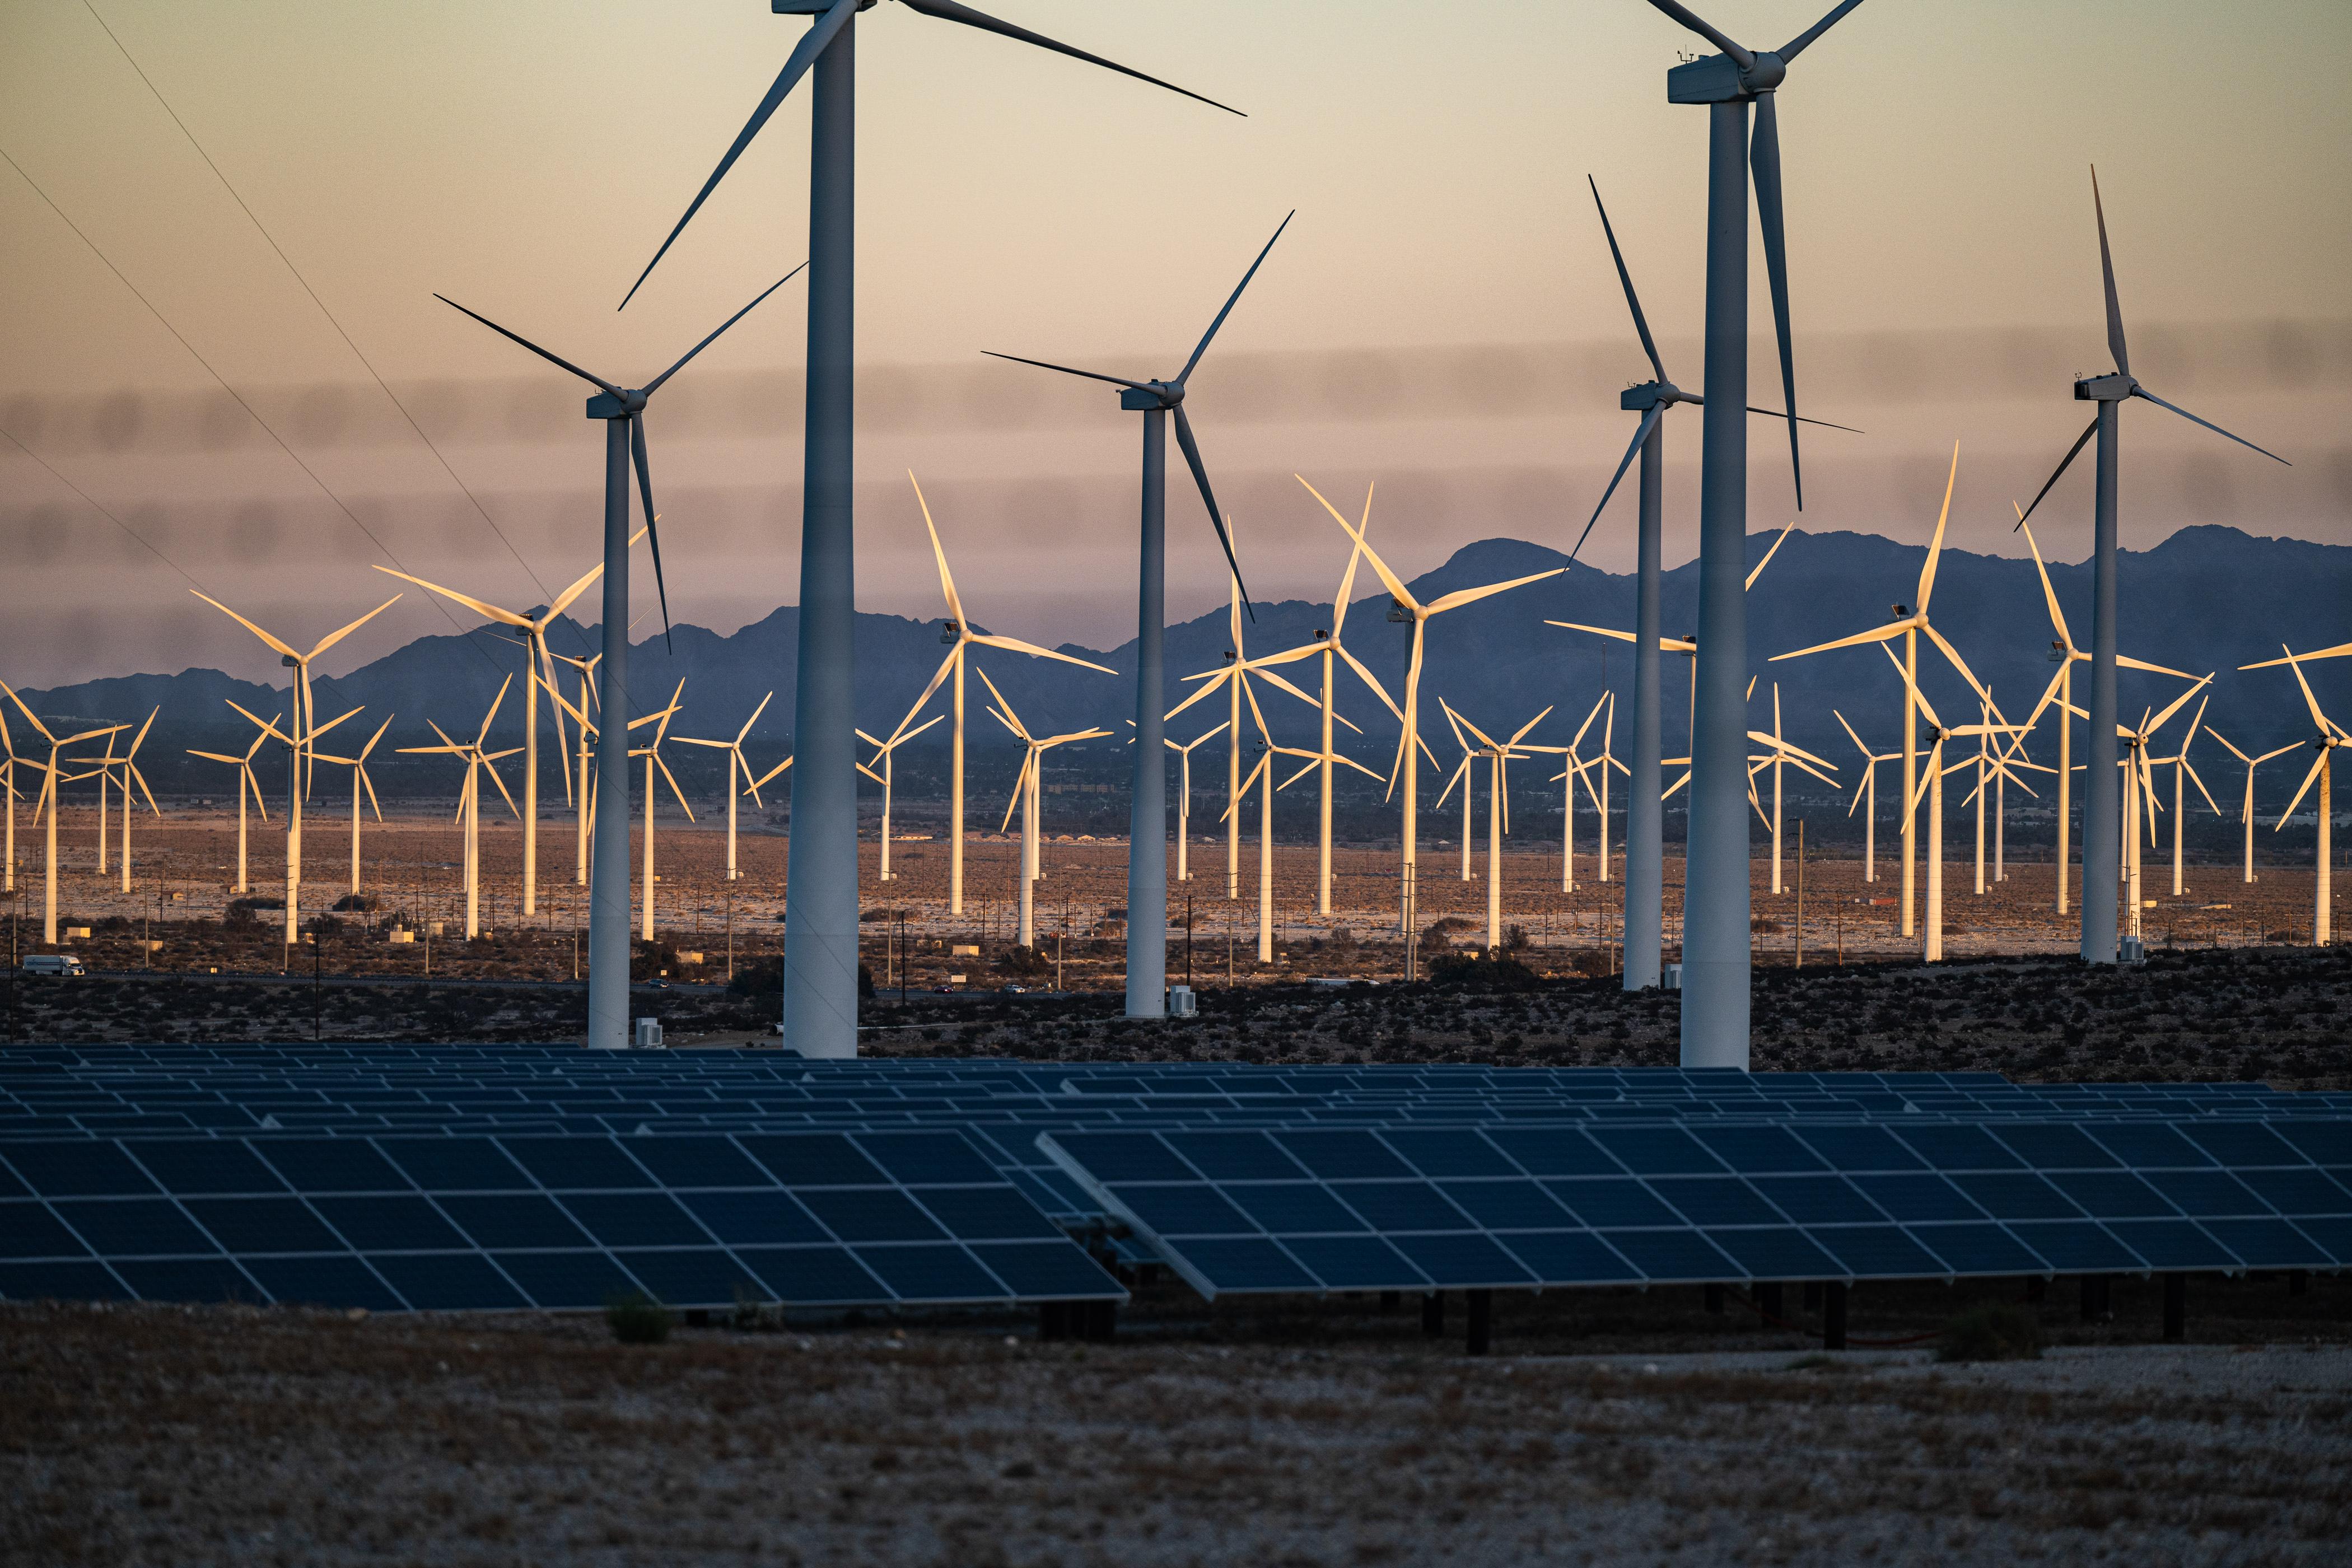 Photo during sunset of dozens of wind turbines towering over solar panels in the U.S. desert.